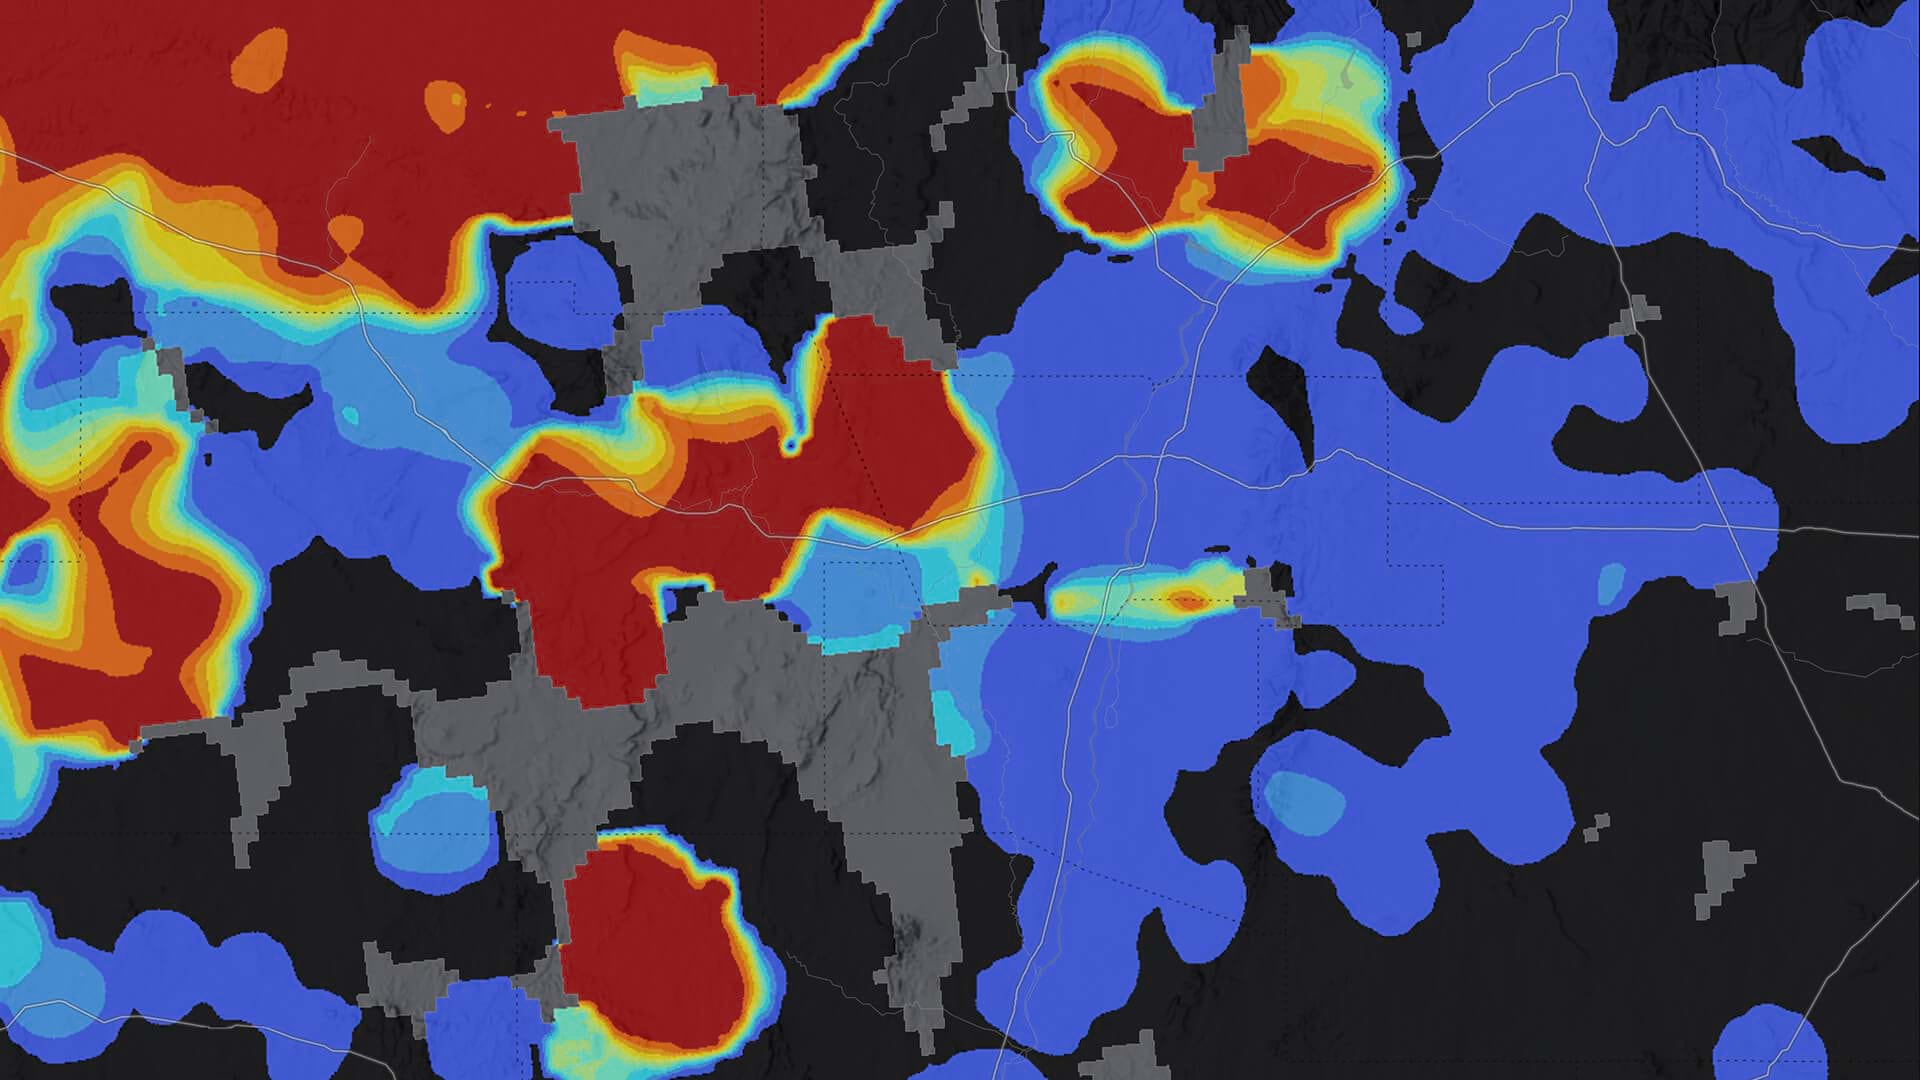 Shades of blue and red denote threat levels on a map